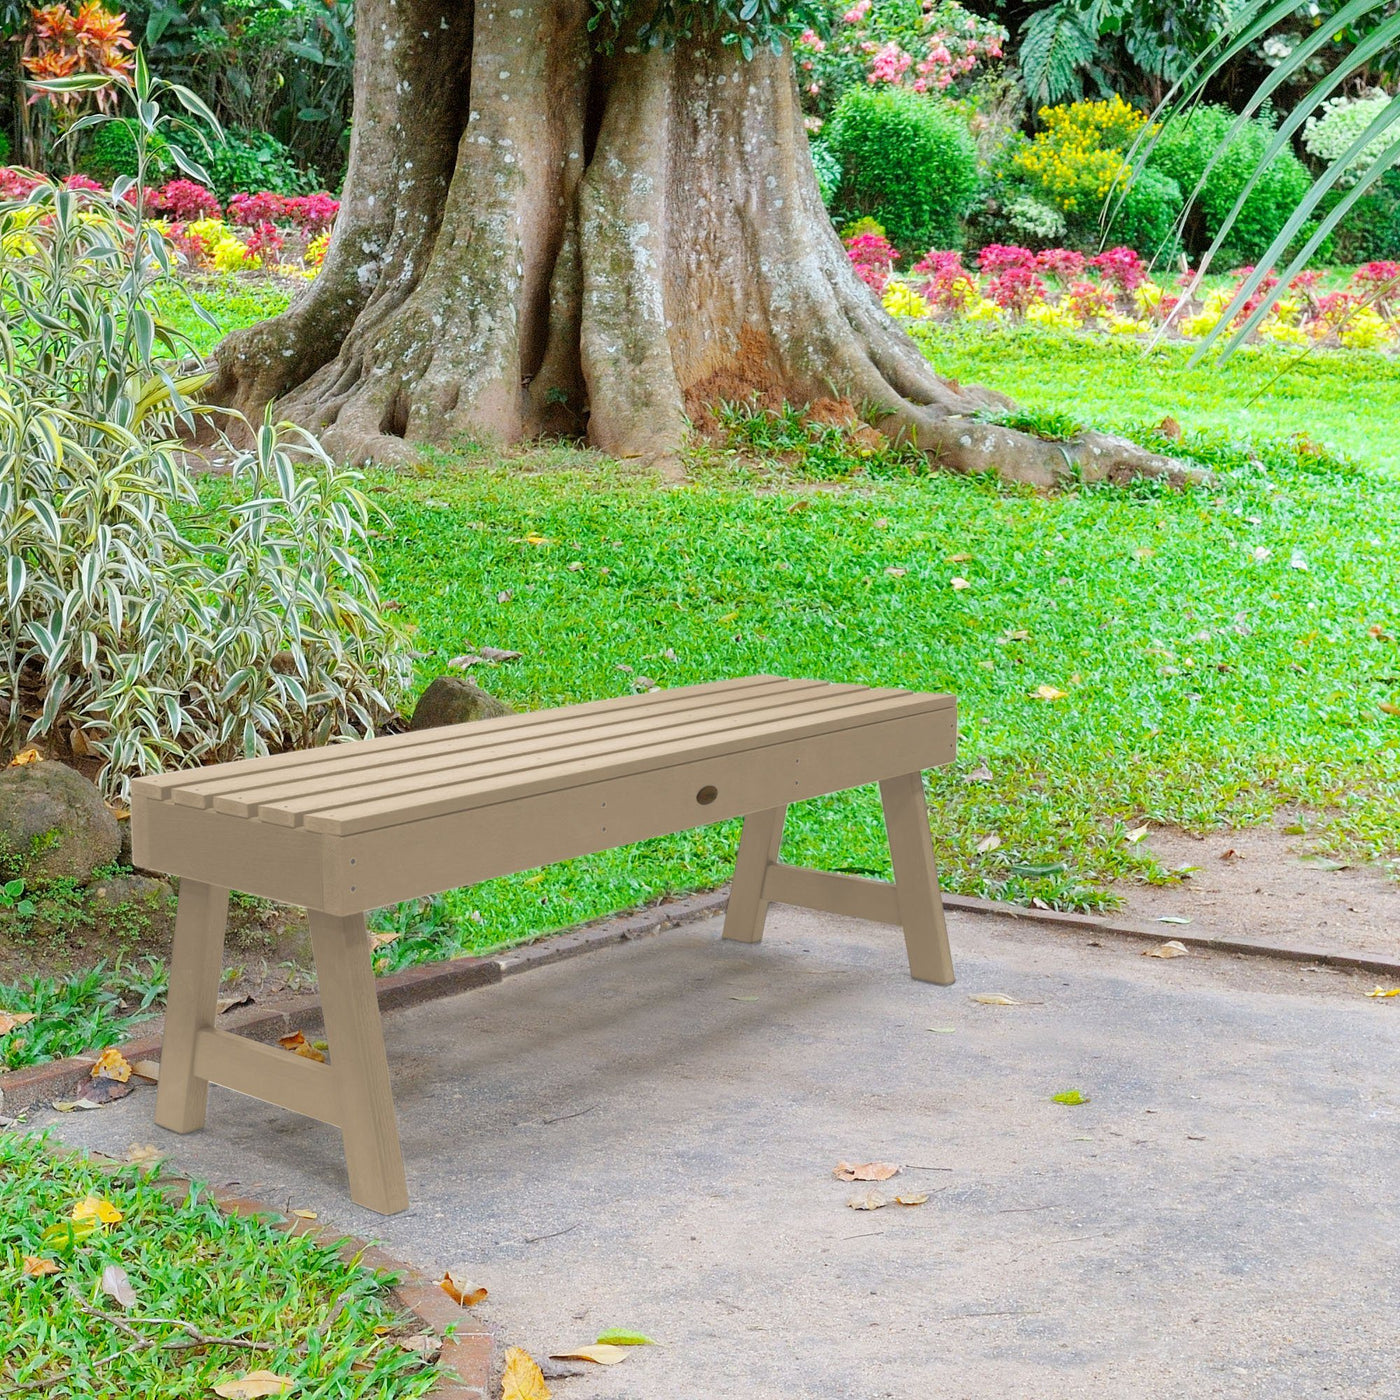 Weatherly Picnic Backless Bench - 4ft BenchSwing Highwood USA 